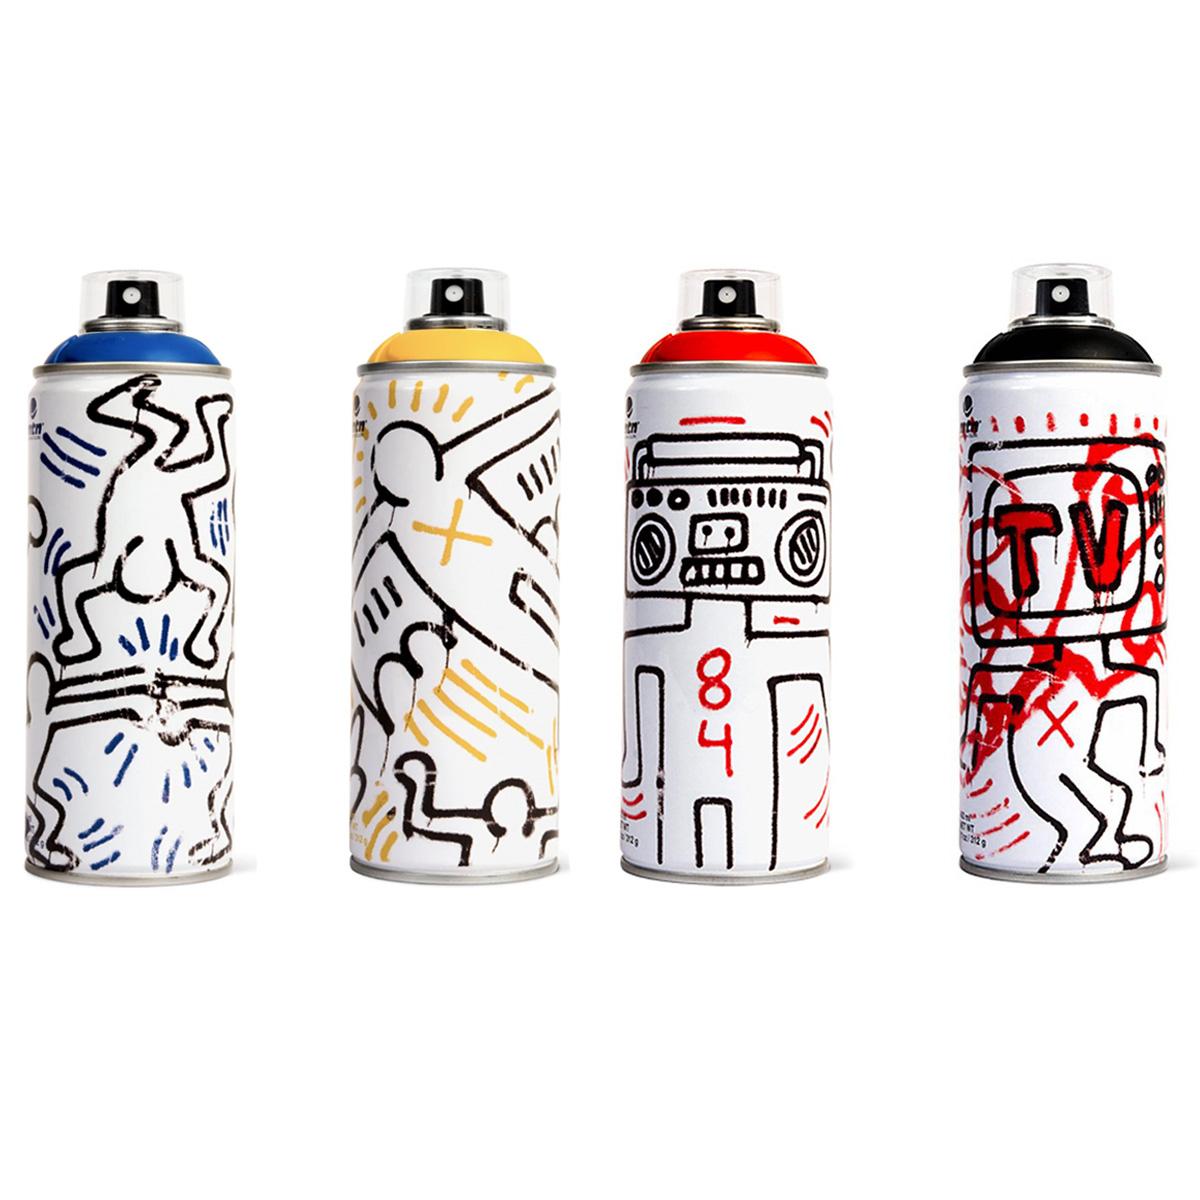 Limited edition Keith Haring spray paint can set - Mixed Media Art by (after) Keith Haring